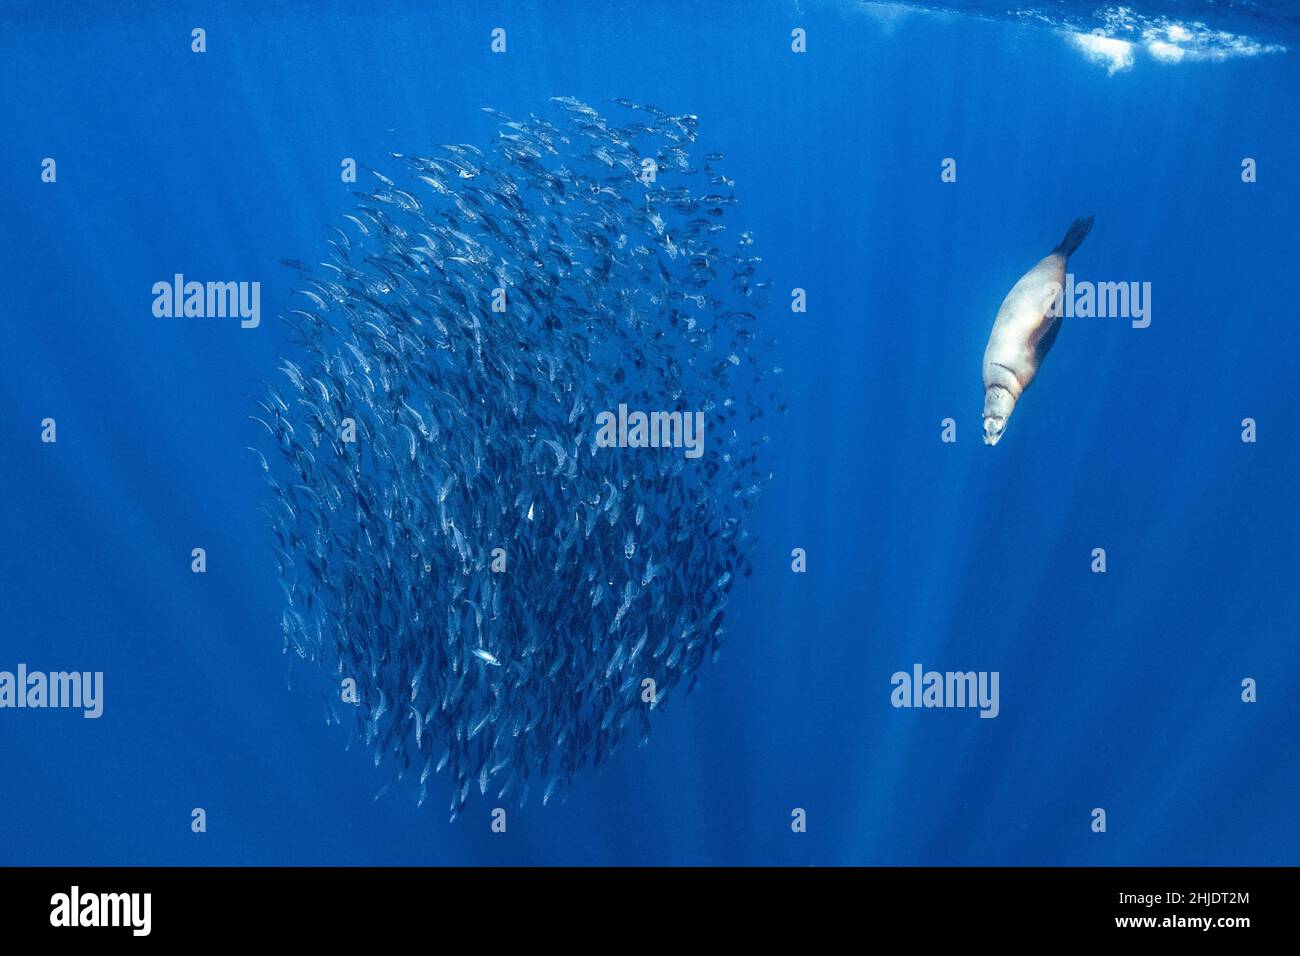 A California sea lion, Zalophus californianus, rides herd on a school of Pacific mackerel, Scomber japonicus, the tight formation making it easier to Stock Photo